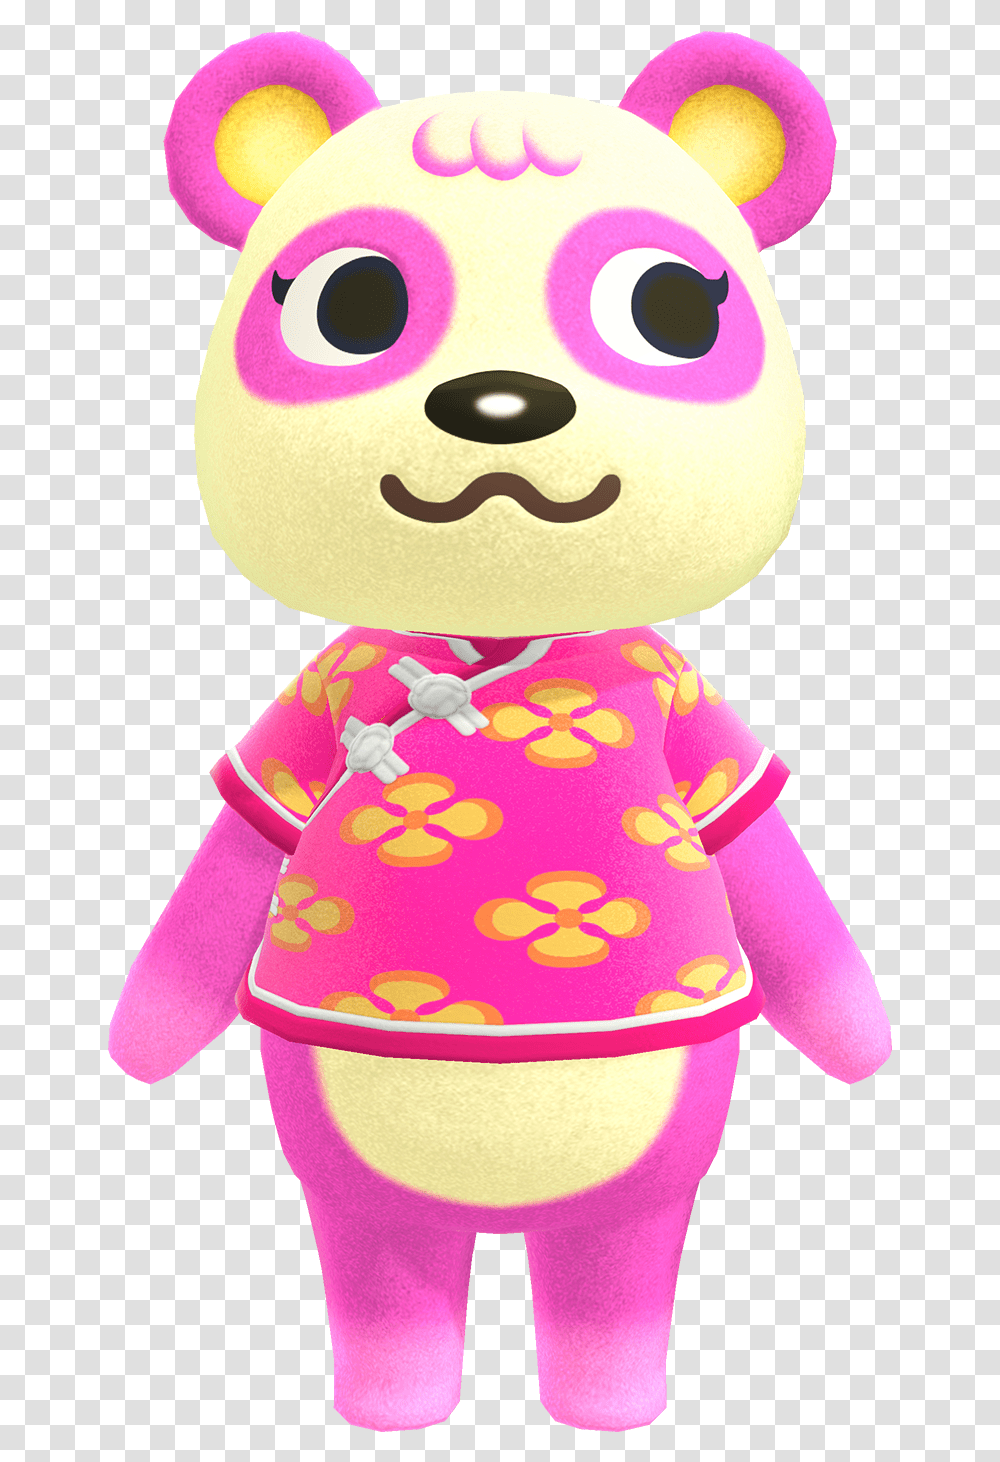 Pinky Animal Crossing Villagers Pinky, Doll, Toy, Plush, Figurine Transparent Png